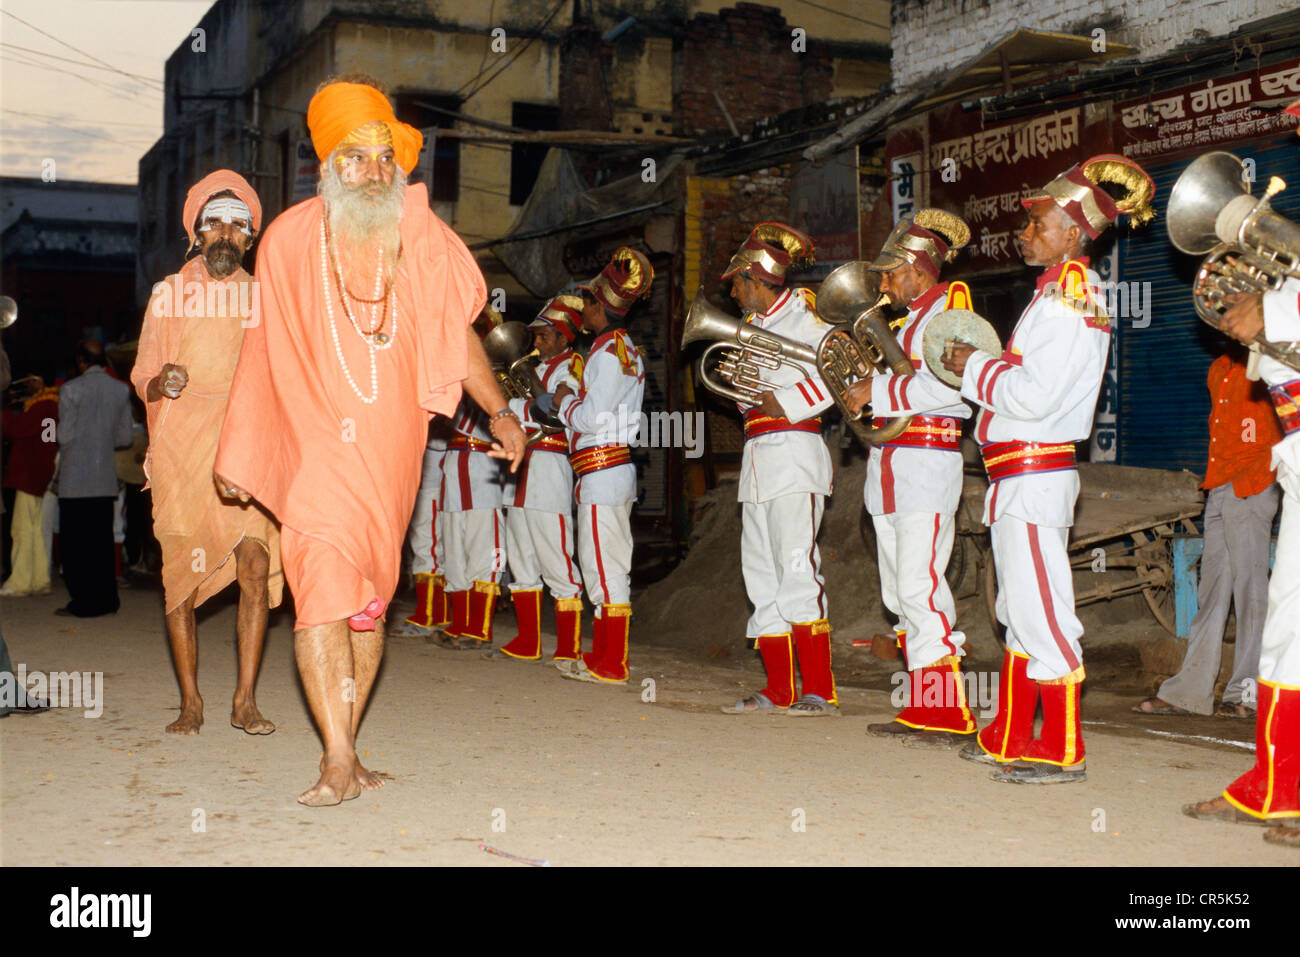 Sadhus from higher levels in hierarchy leading a procession, Varanasi, Uttar Pradesh, India, Asia Stock Photo